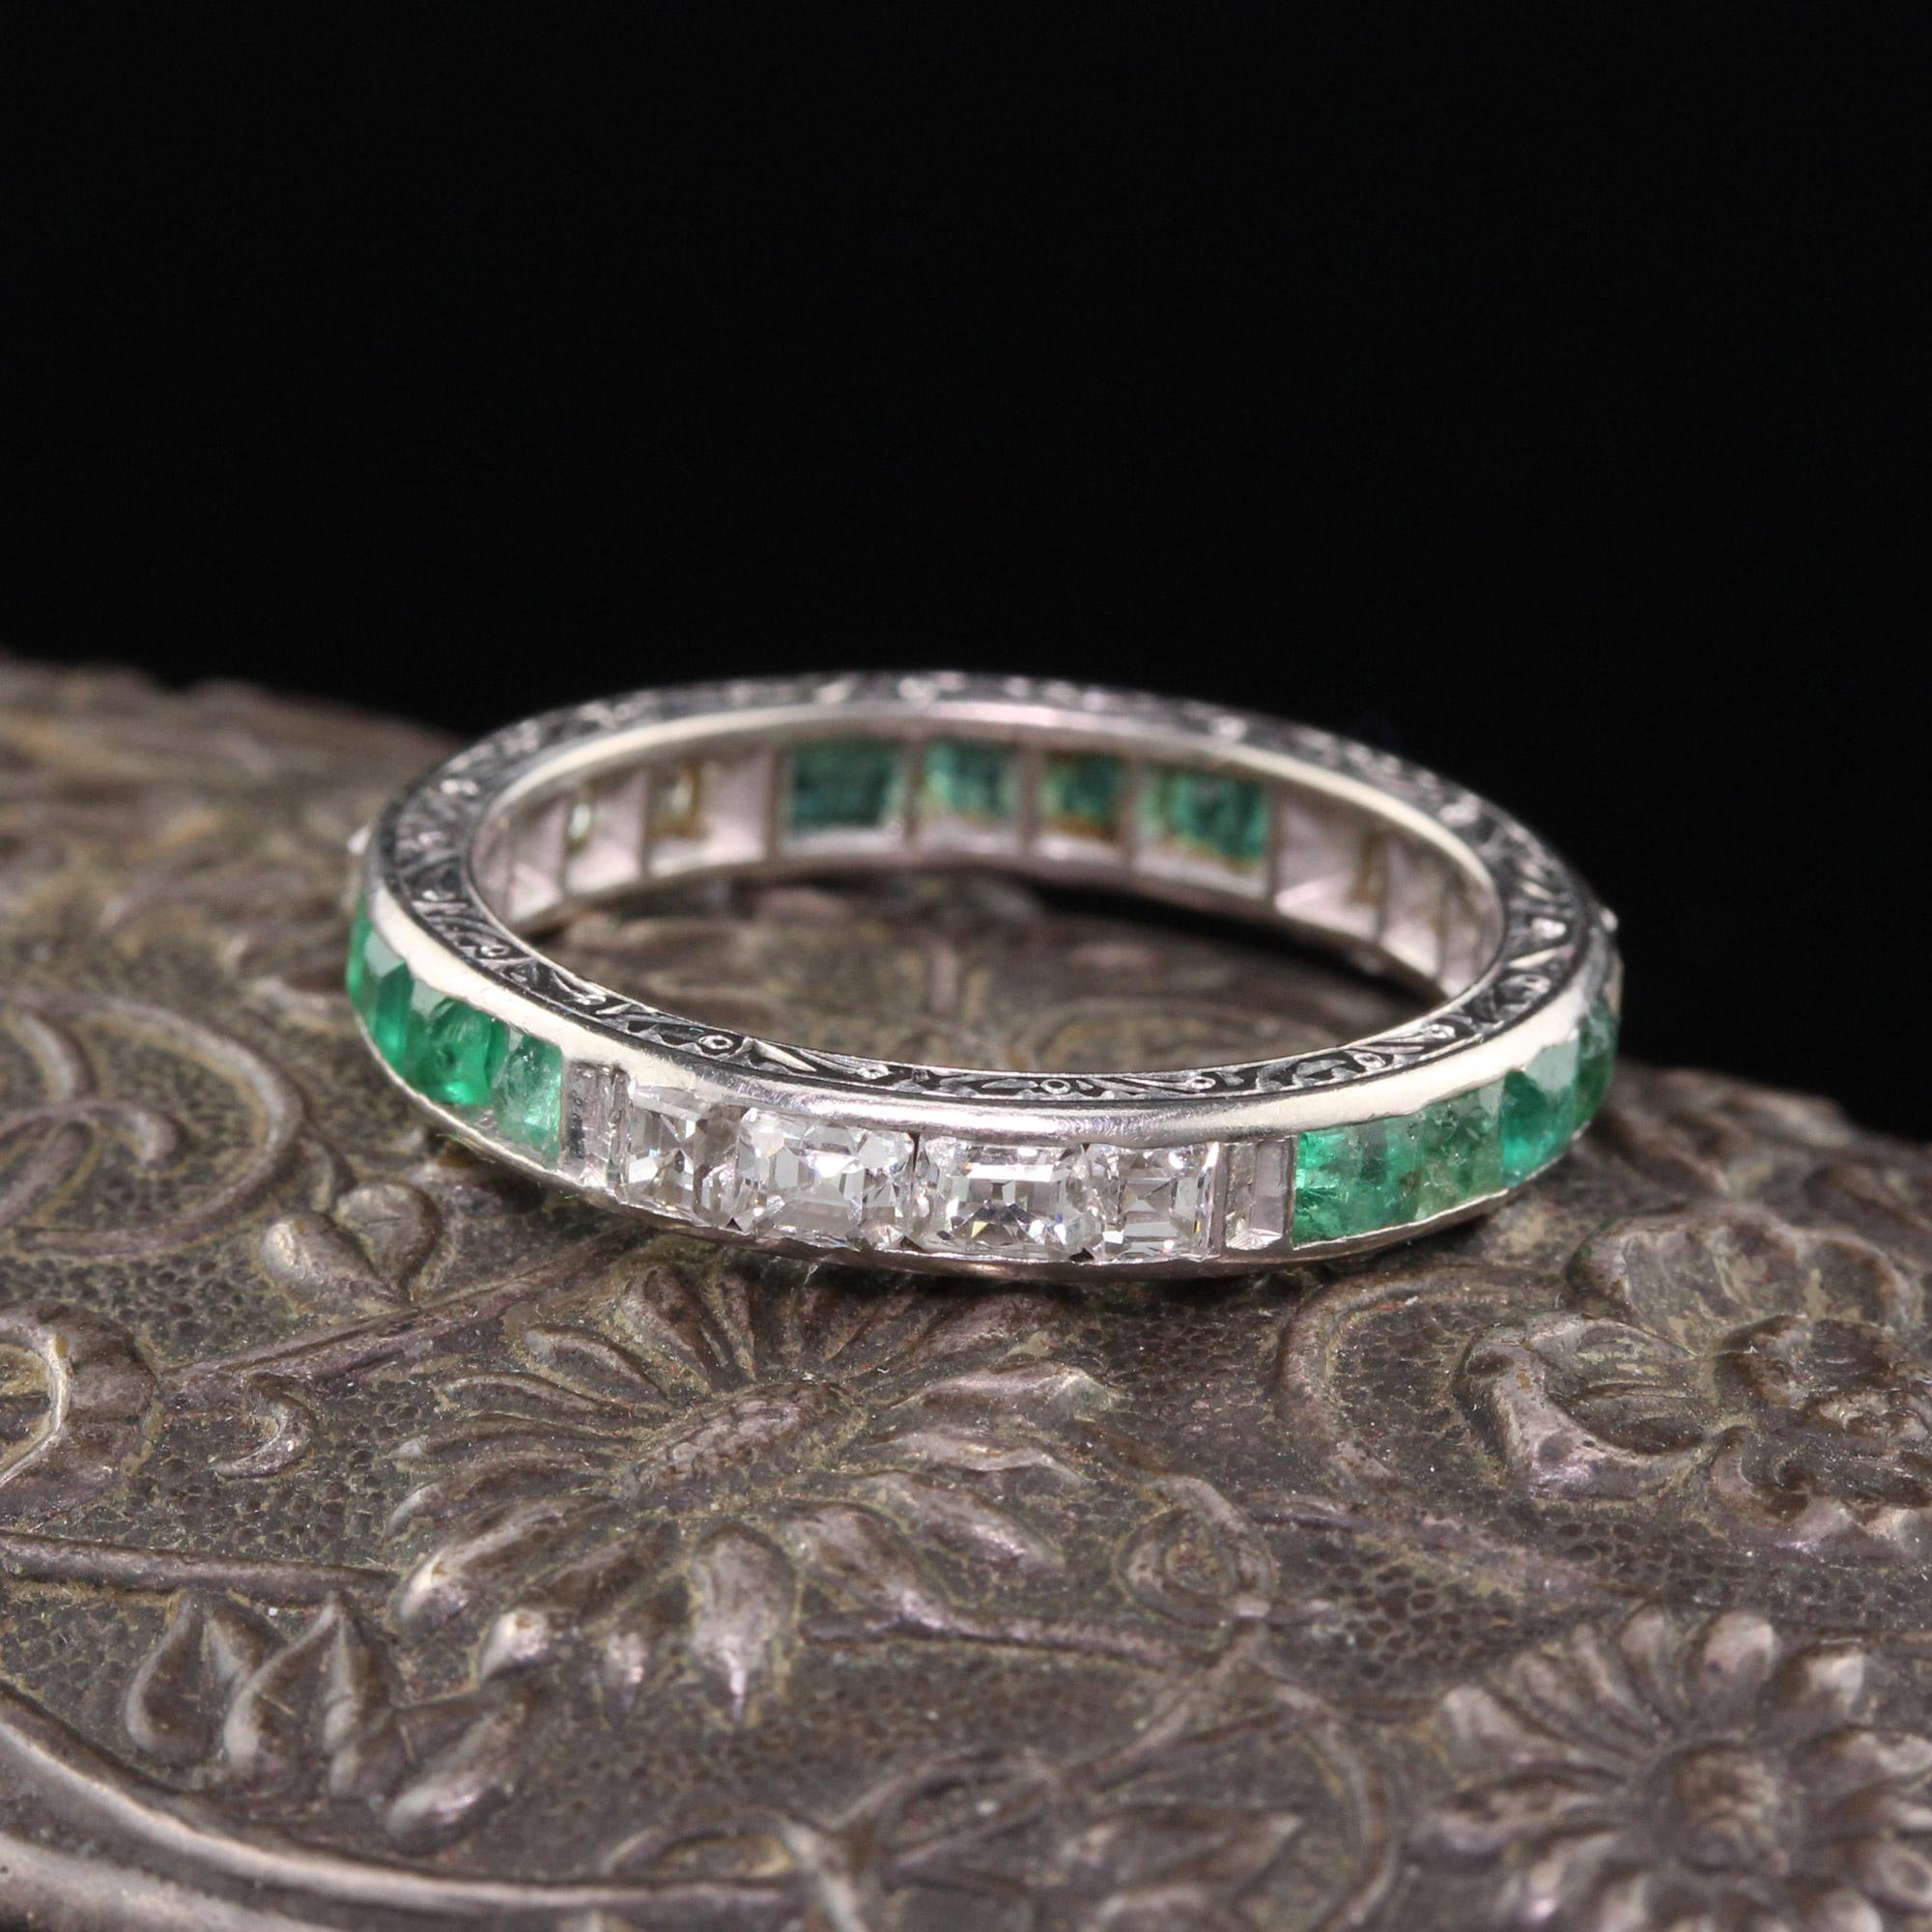 Art Deco Platinum Eternity Band with emeralds, asscher cut diamonds, and crisp engravings on both sides. The emeralds are abraded from almost 100 years of wear, but the ring is in overall great condition for it's age!

#R0157

Metal: